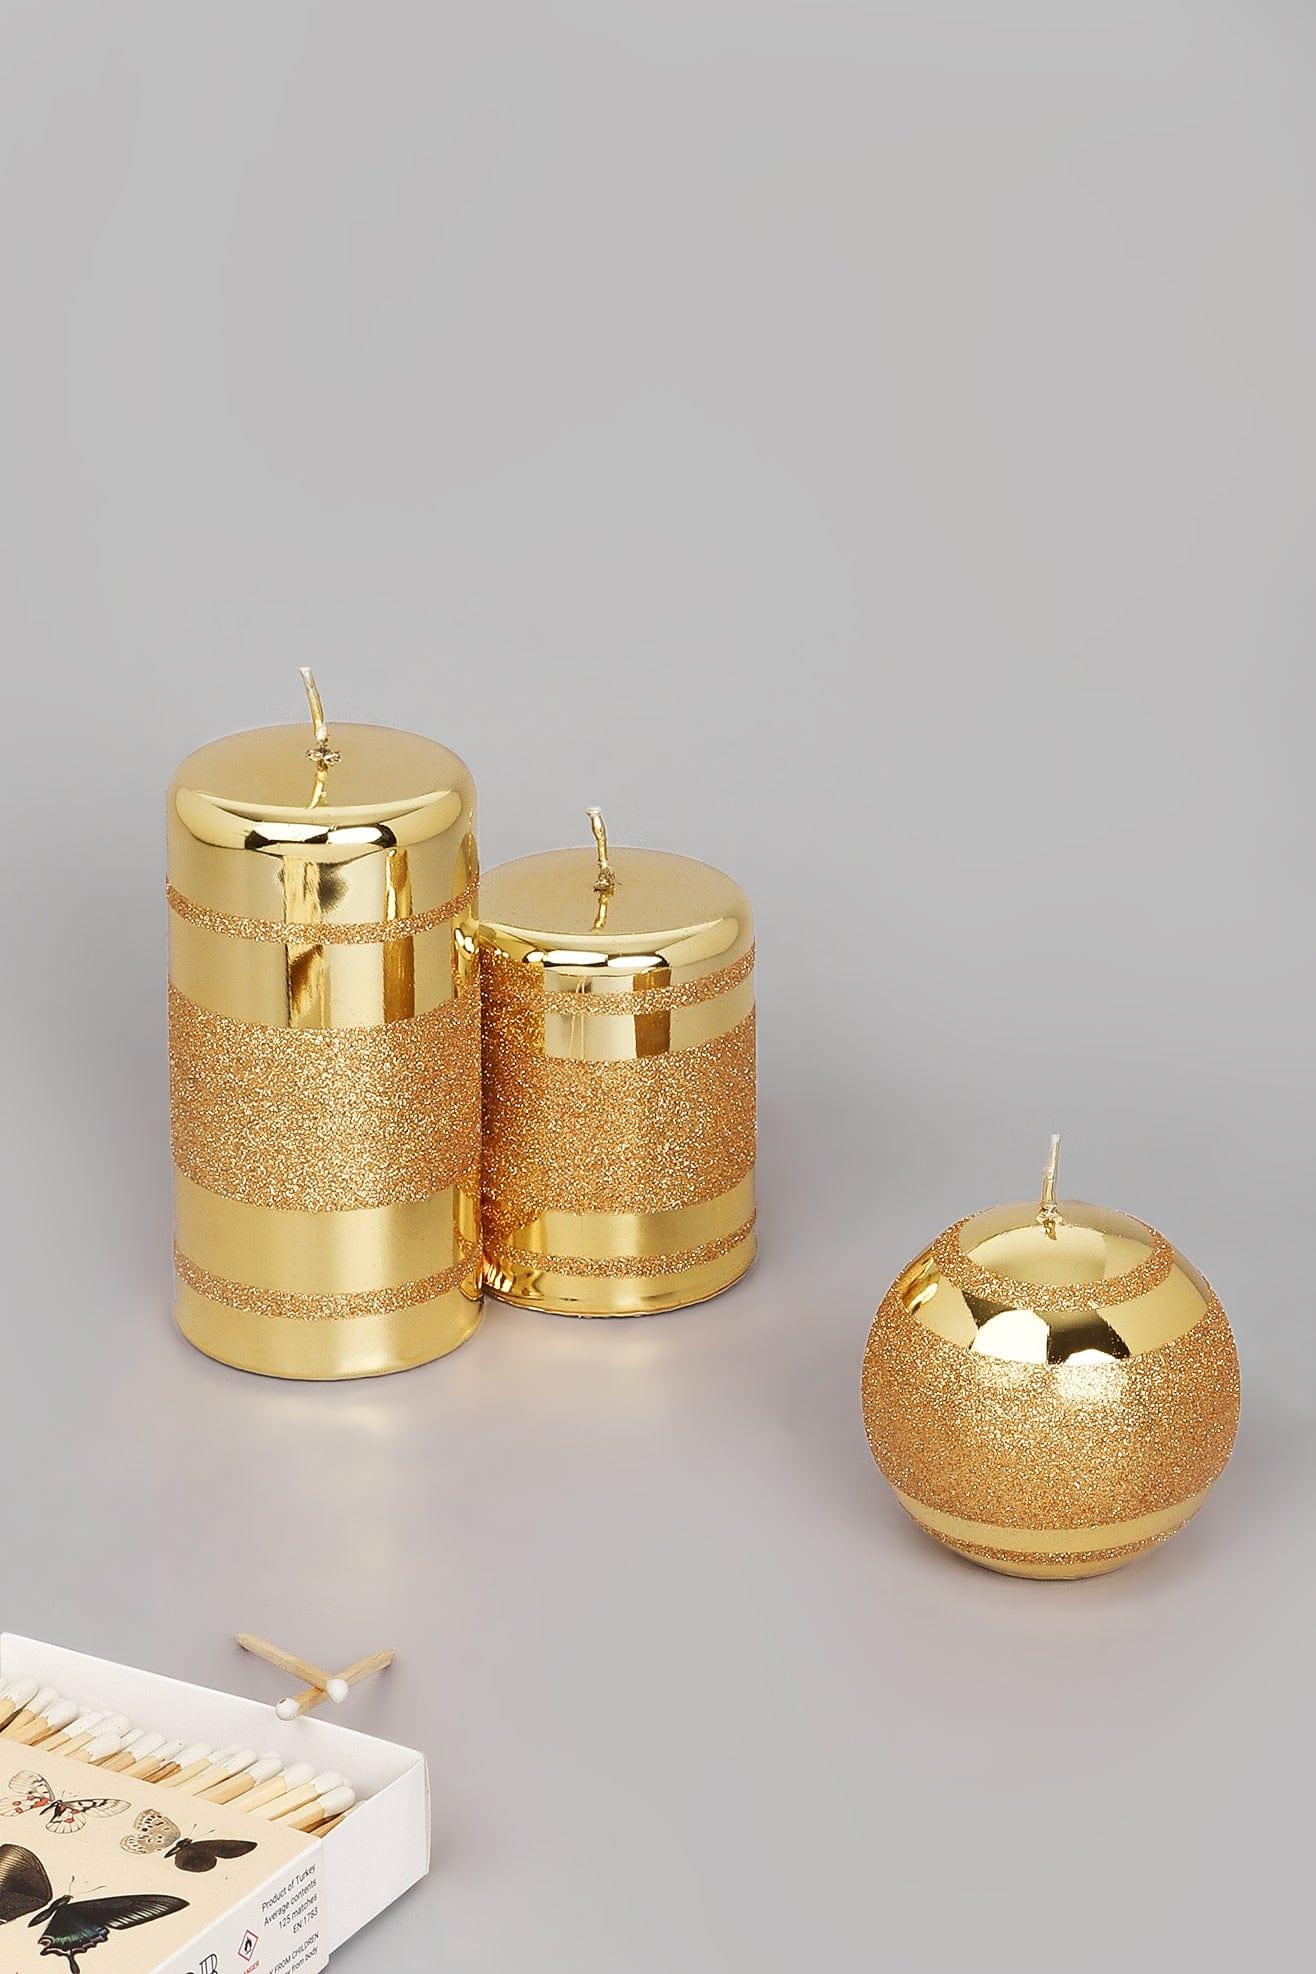 G Decor Candles & Candle Holders Gold / Set of Three Gold Glass Effect Striped Glitter Gloss Ball Pillar Candles